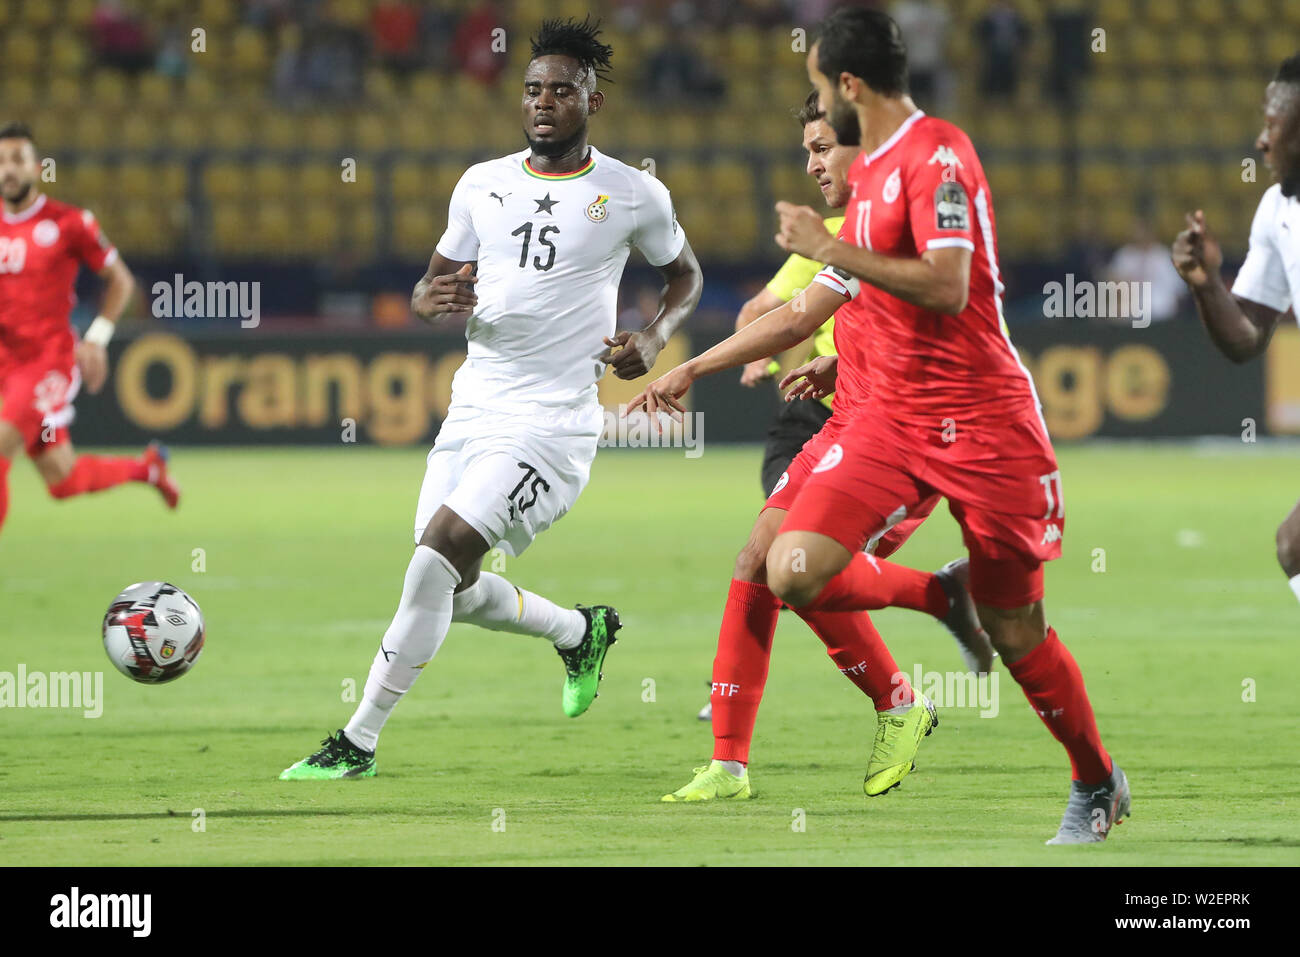 Ismailia, Egypt. 08th July, 2019. Ghana·s Mubarak Wakaso (L) and Tunisia·s Yassine Khenissi battle for the ball during the 2019 Africa Cup of Nations round of 16 soccer match between Ghana and Tunisia at the Ismailia Stadium. Credit: Gehad Hamdy/dpa/Alamy Live News Stock Photo